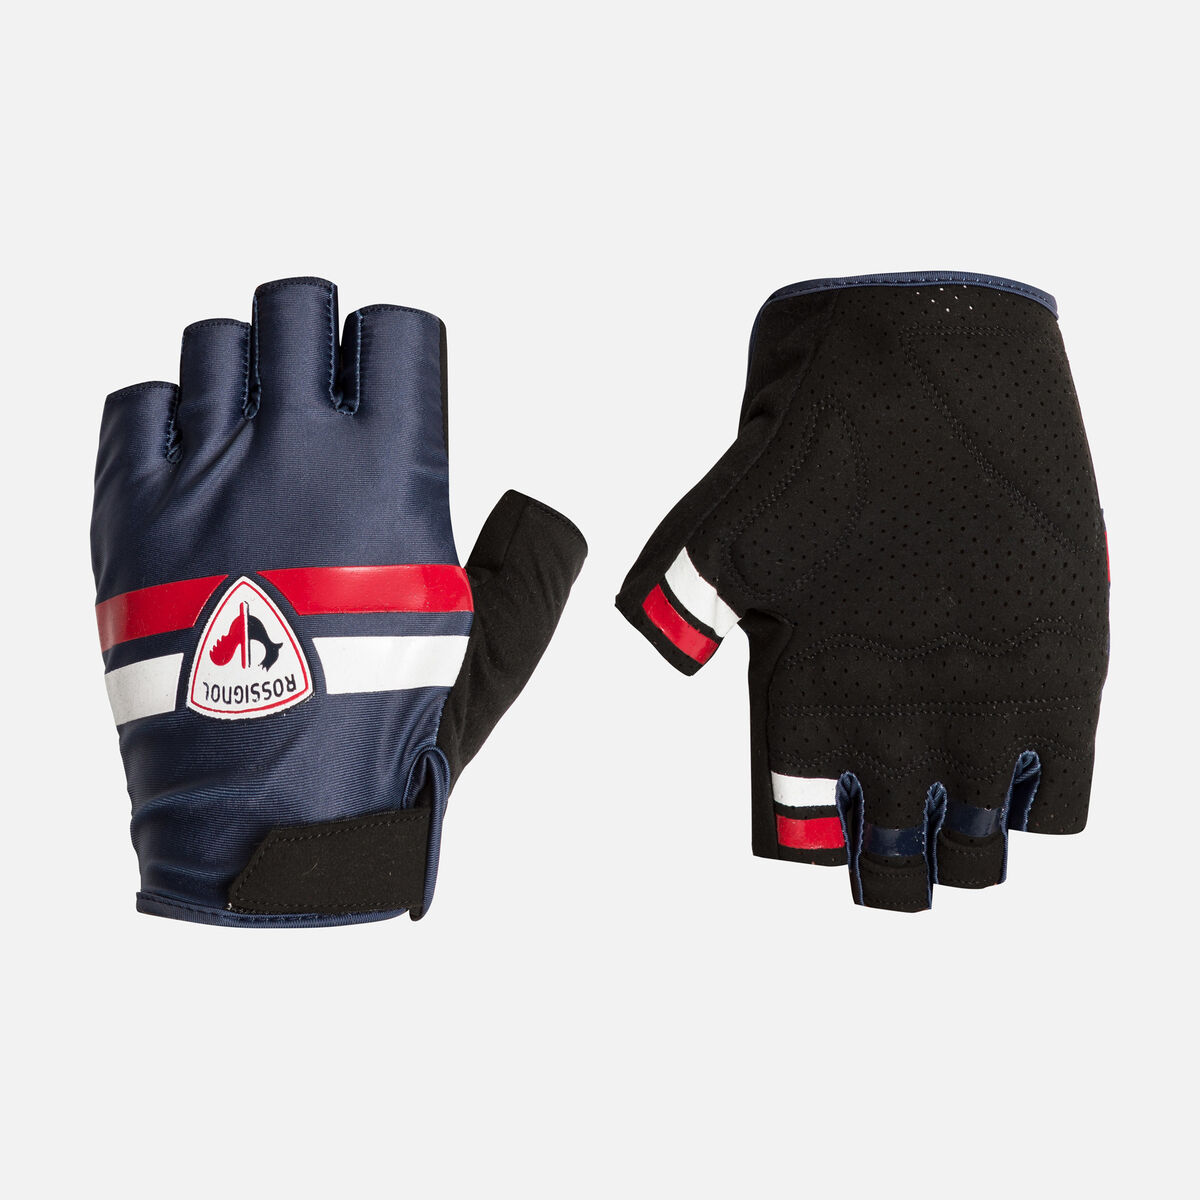 Men's stretch cycling gloves